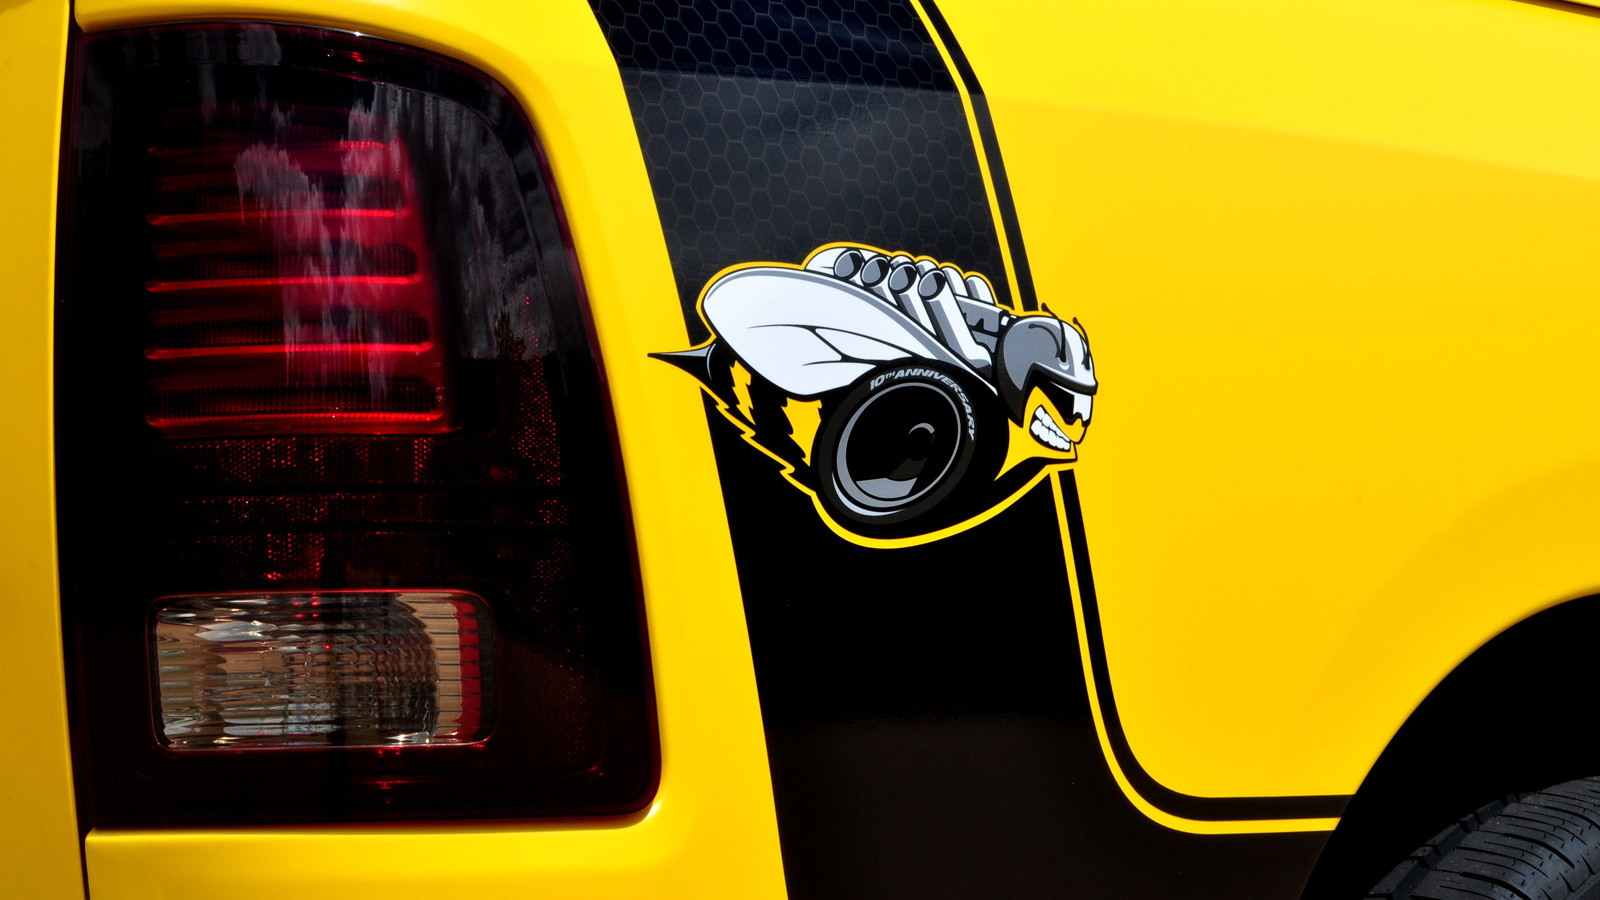 Ram 1500 Rumble Bee concept - 2013 Woodward Dream Cruise